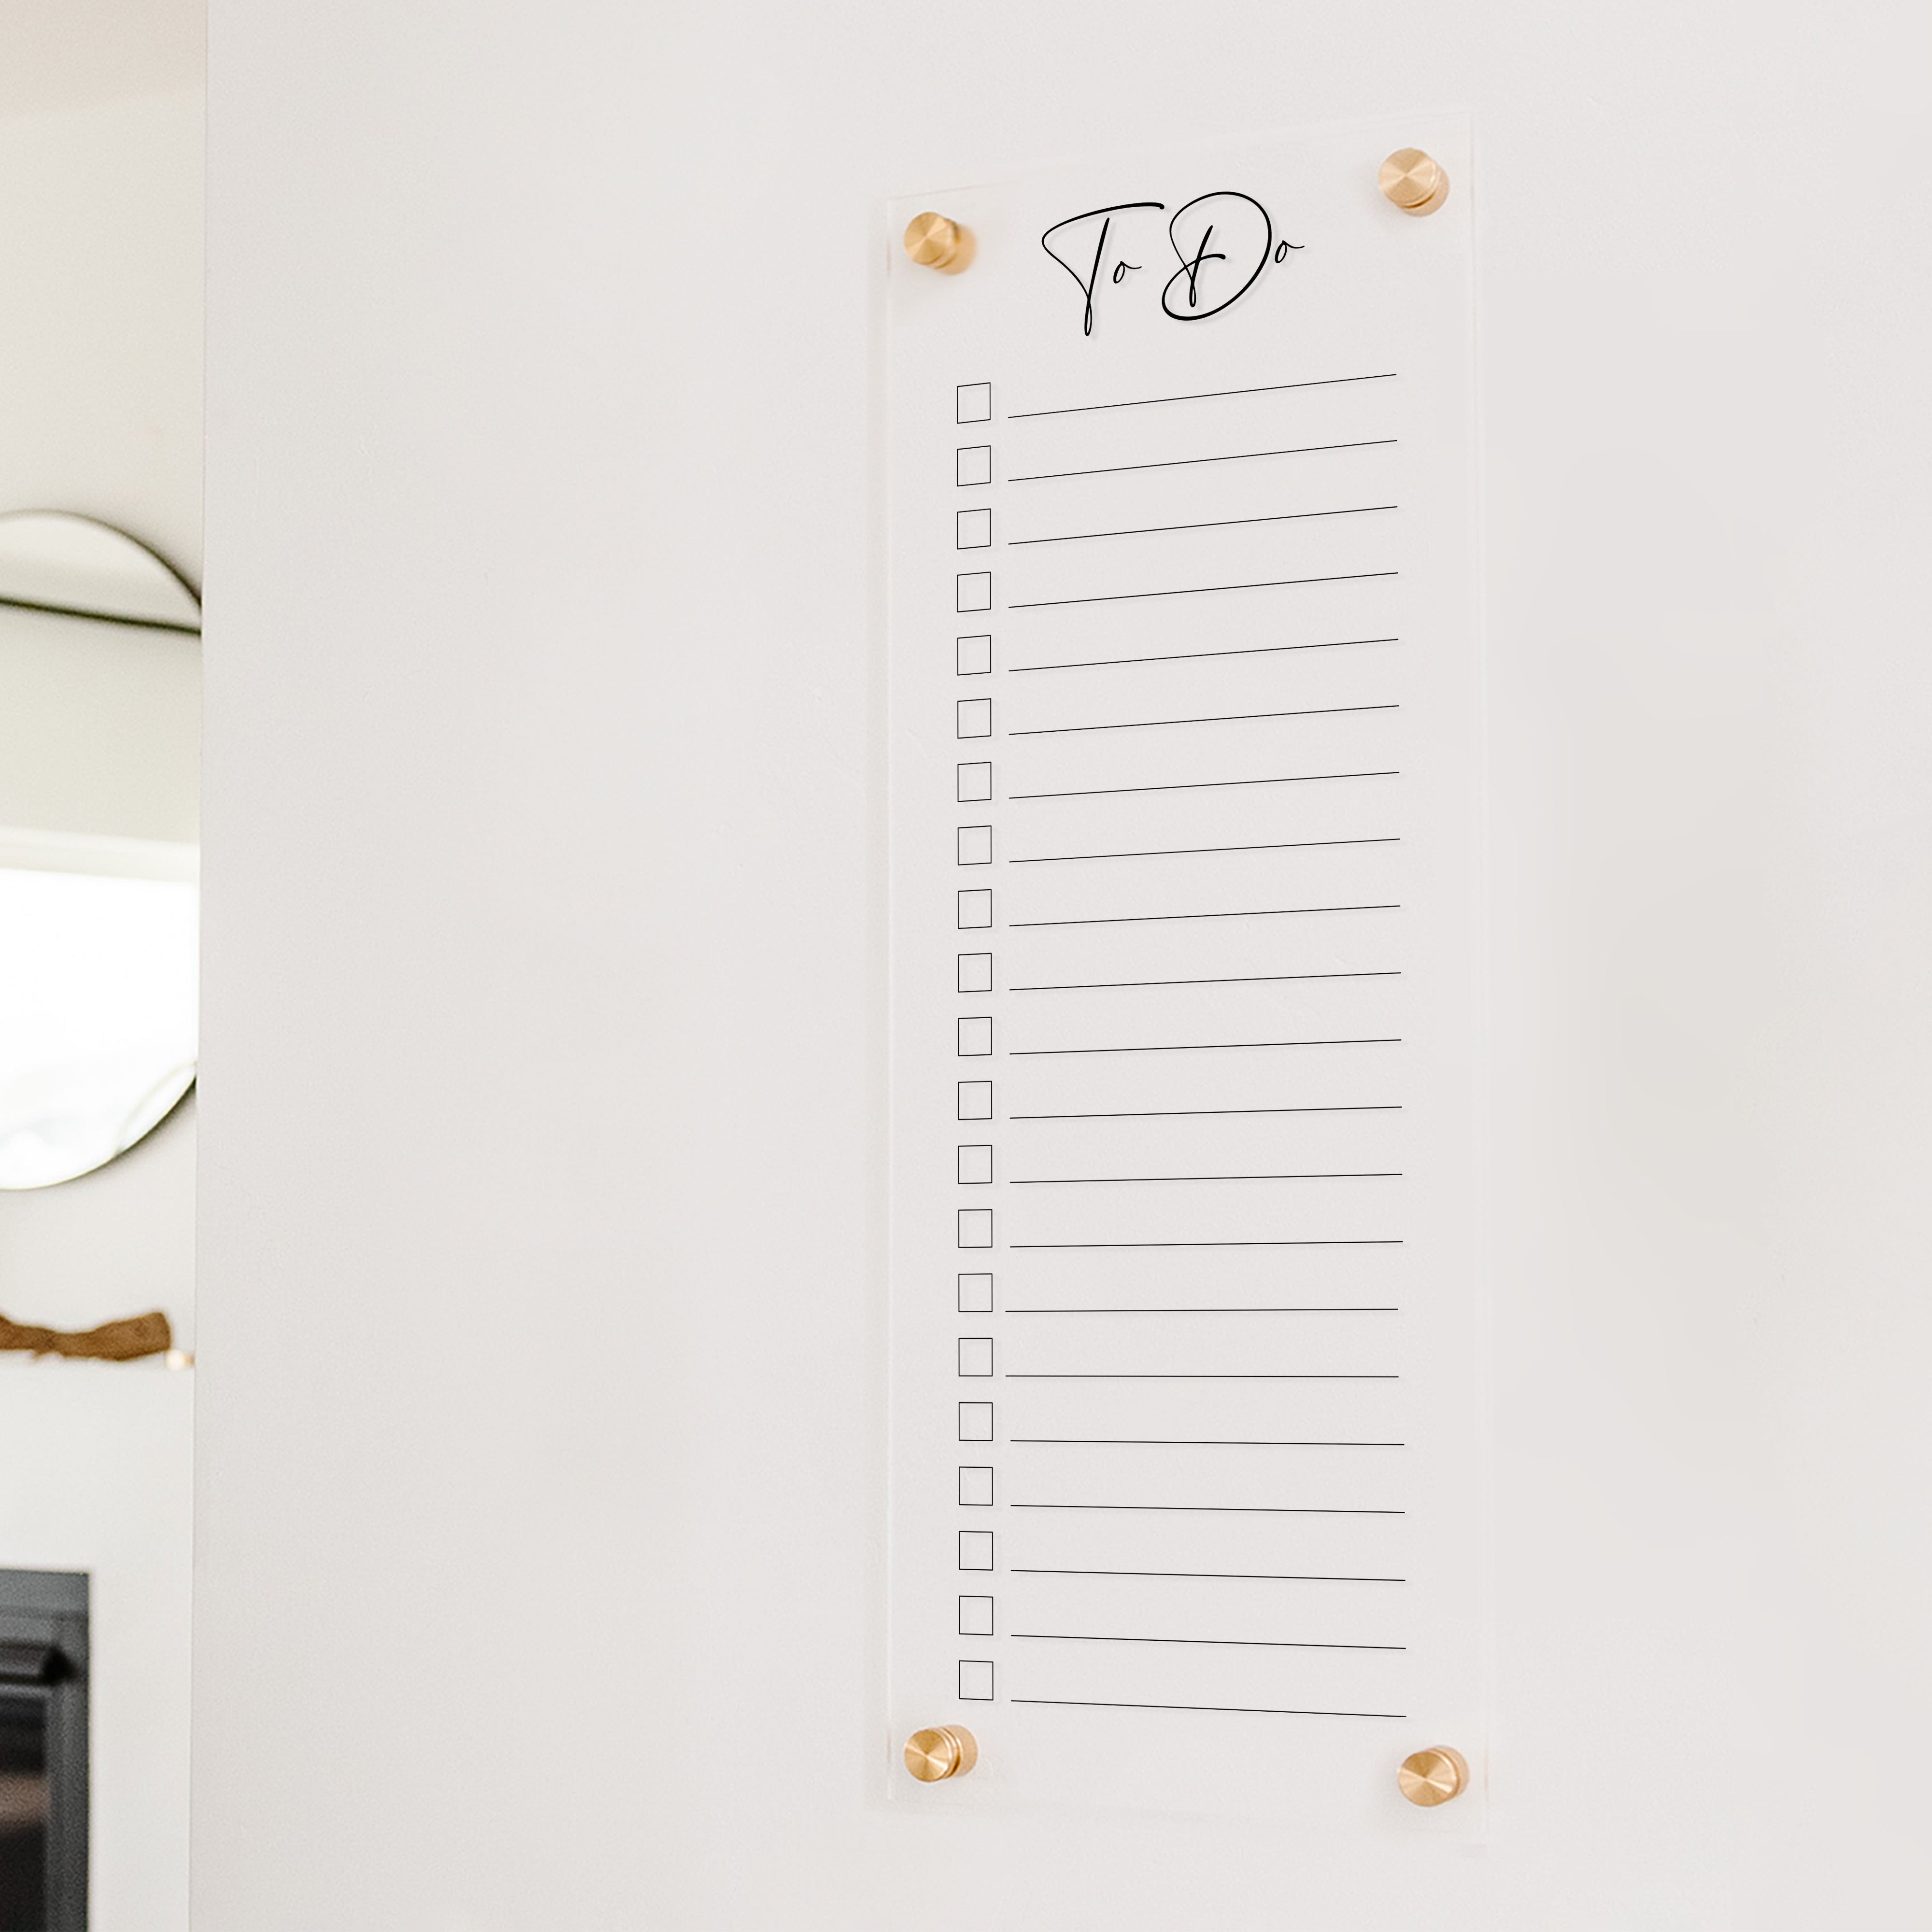 A dry-erase to do list made of acrylic hanging on the wall